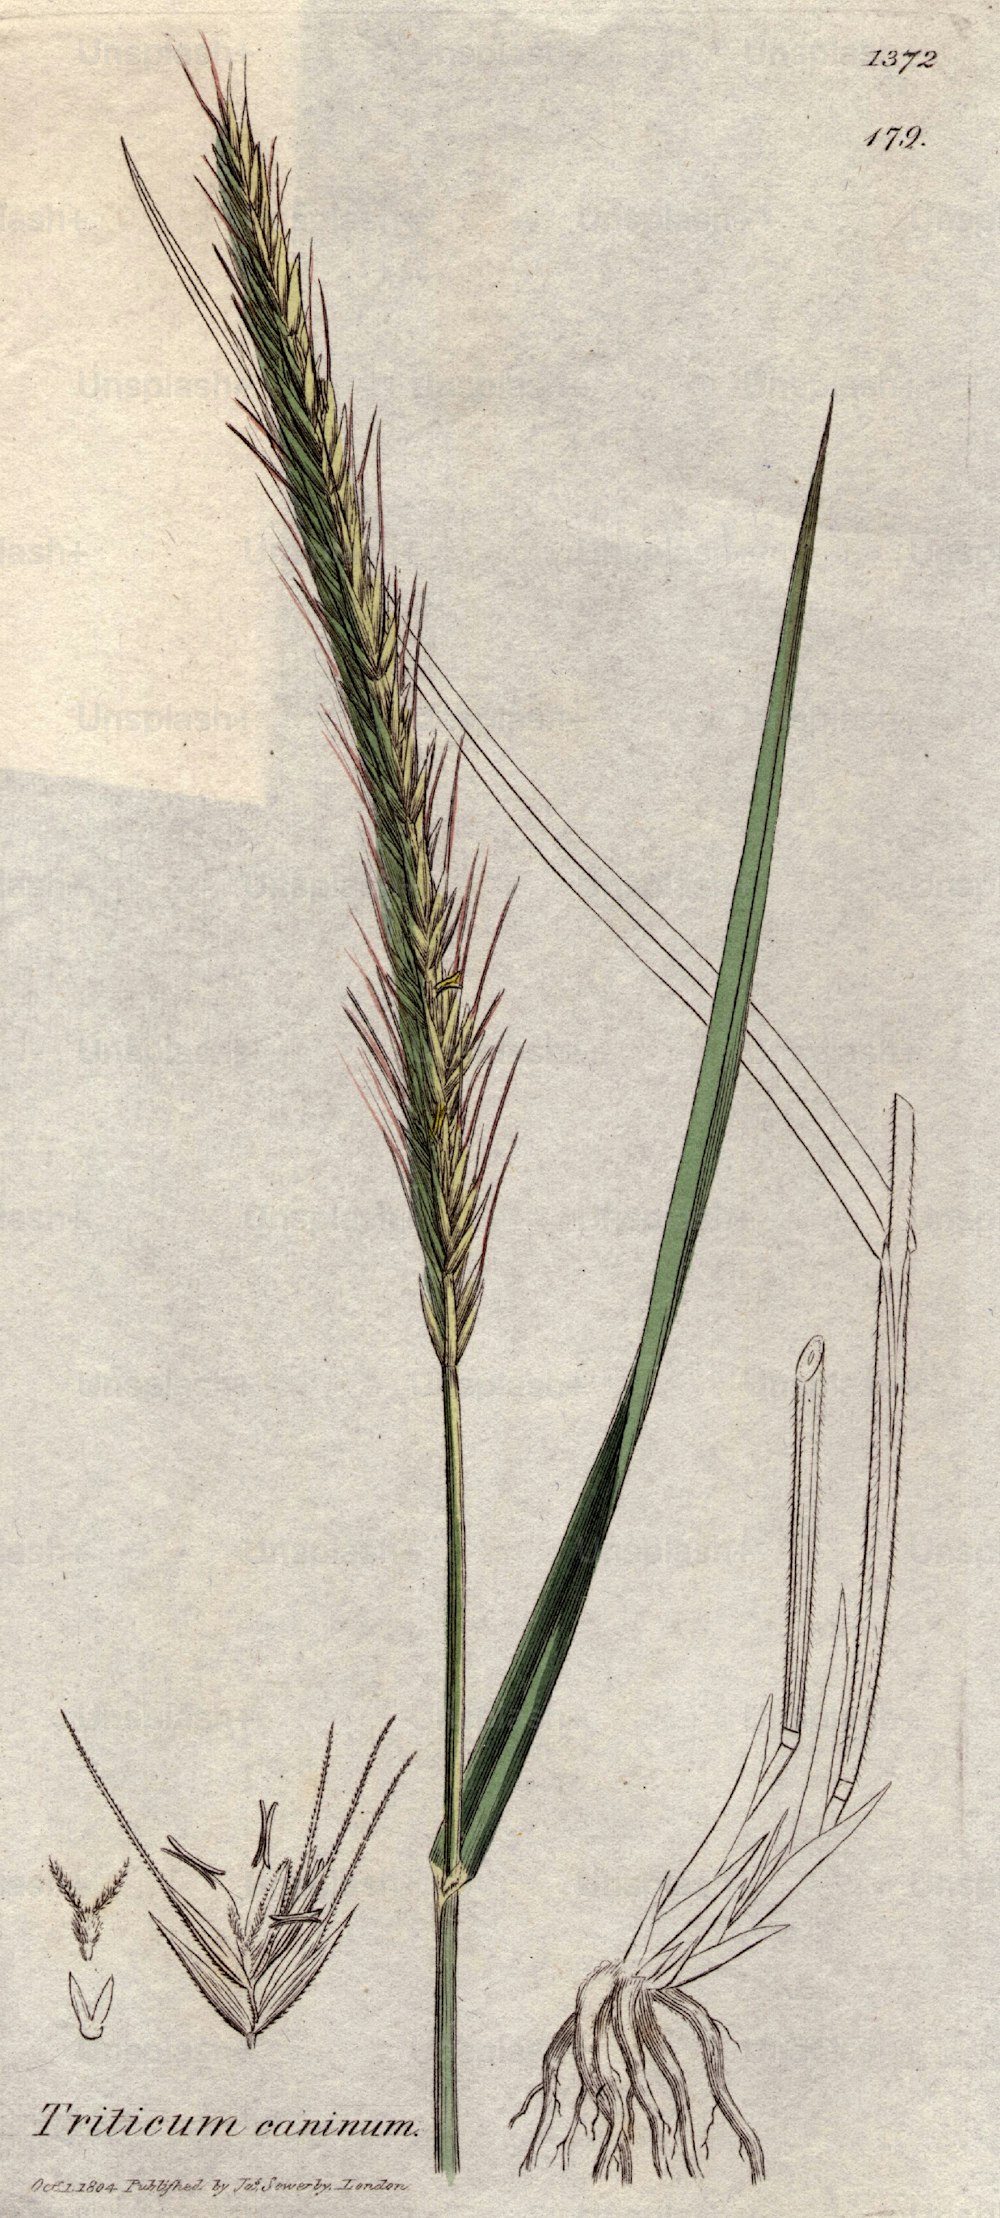 October 1804:  Triticum caninum, a species of grass.  (Photo by Hulton Archive/Getty Images)